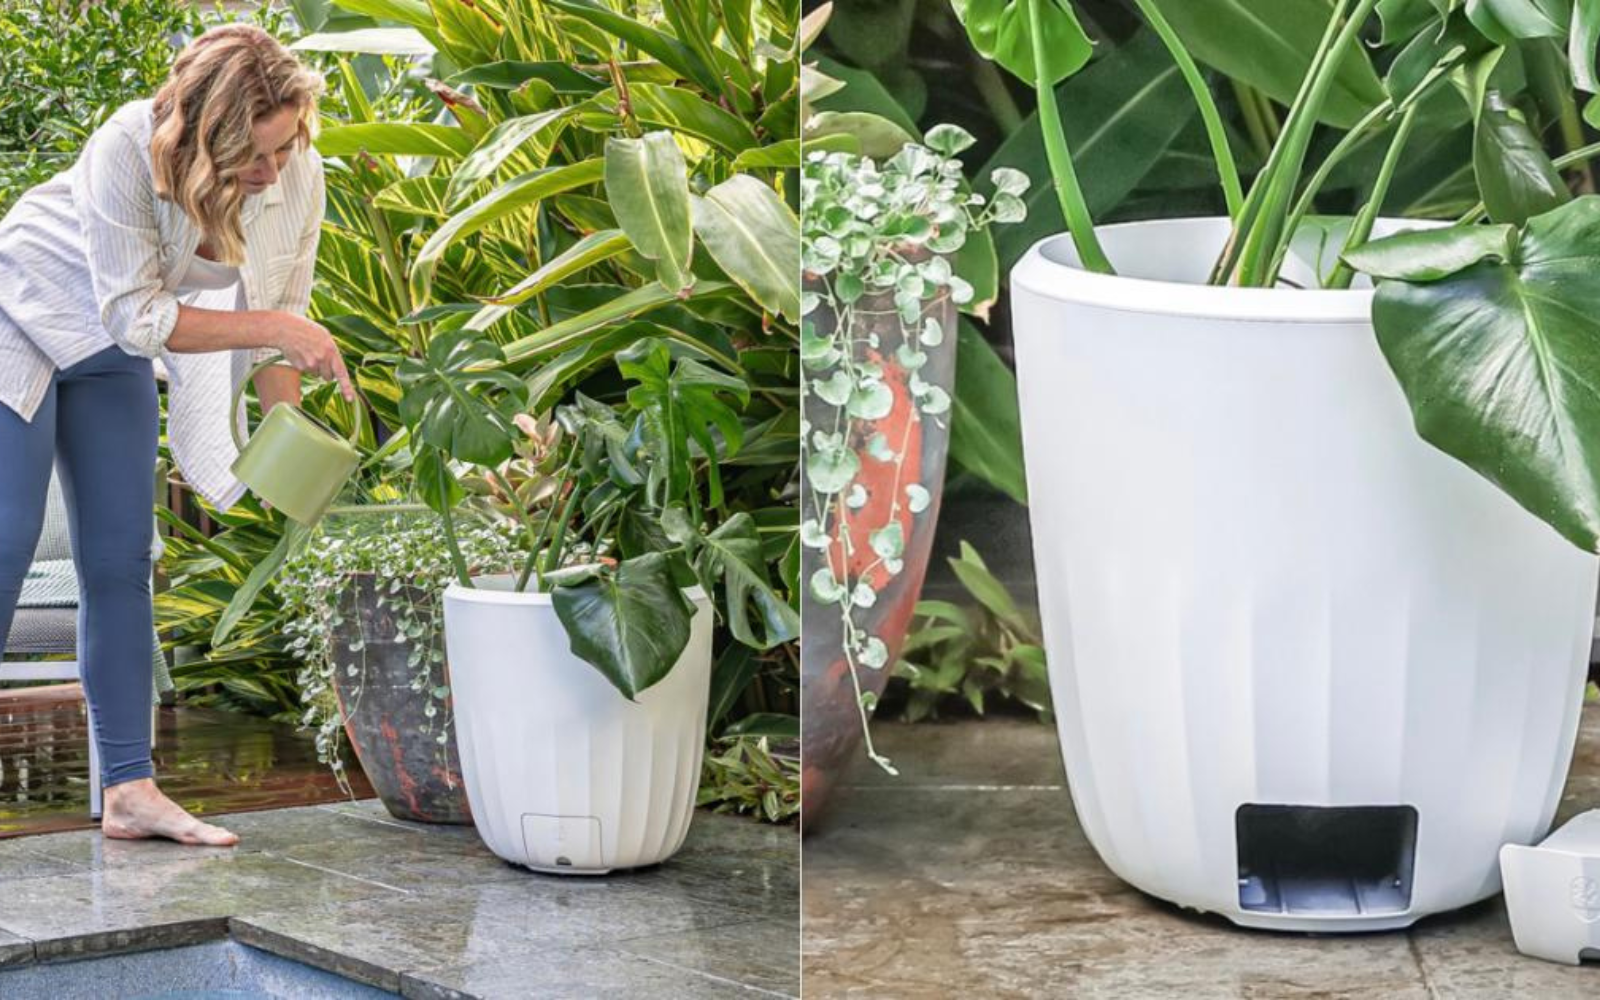 Rooting for Success: How PerkyPod is Changing the Game for Plant Care